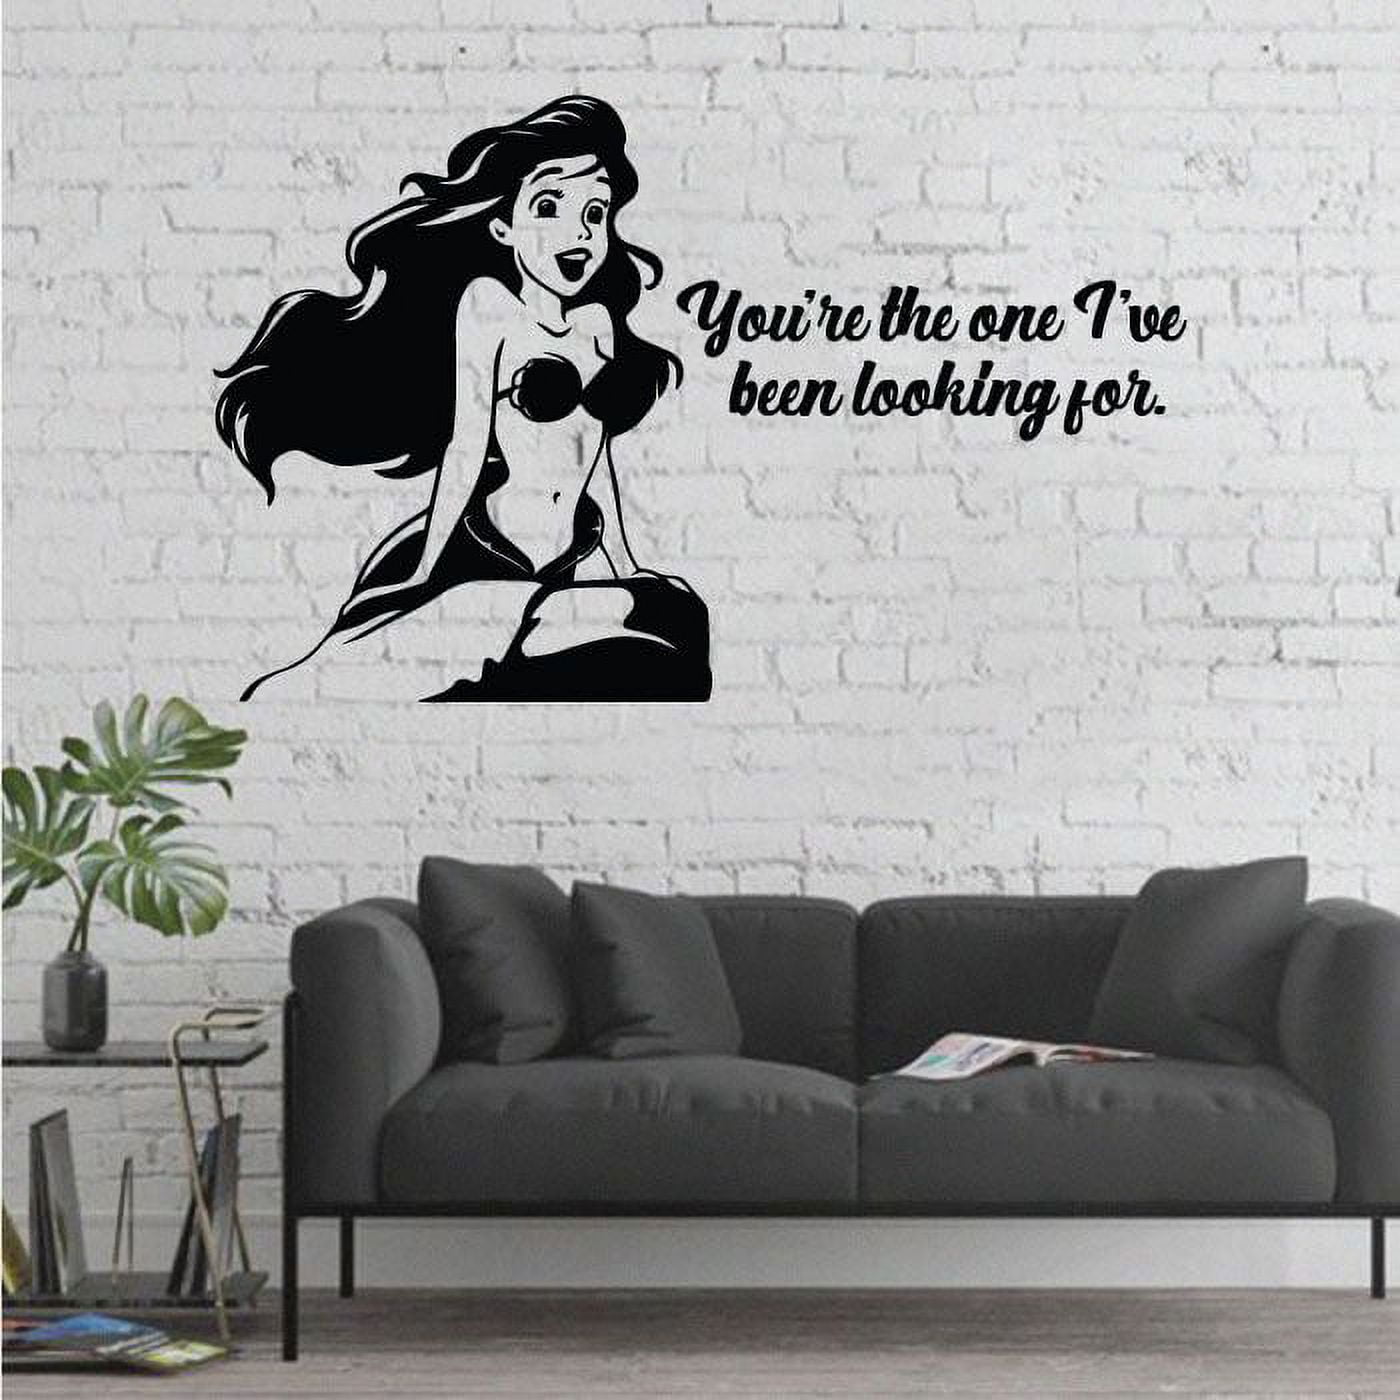 Ariel Disney Princess The Little Mermaid Quotes Quote You're The One I've Been Looking For Little Mermaid Vinyl Wall Art Sticker Decal Home Room Baby Girls Teens Wall Décor Design Size (20x20 inch) - image 1 of 3